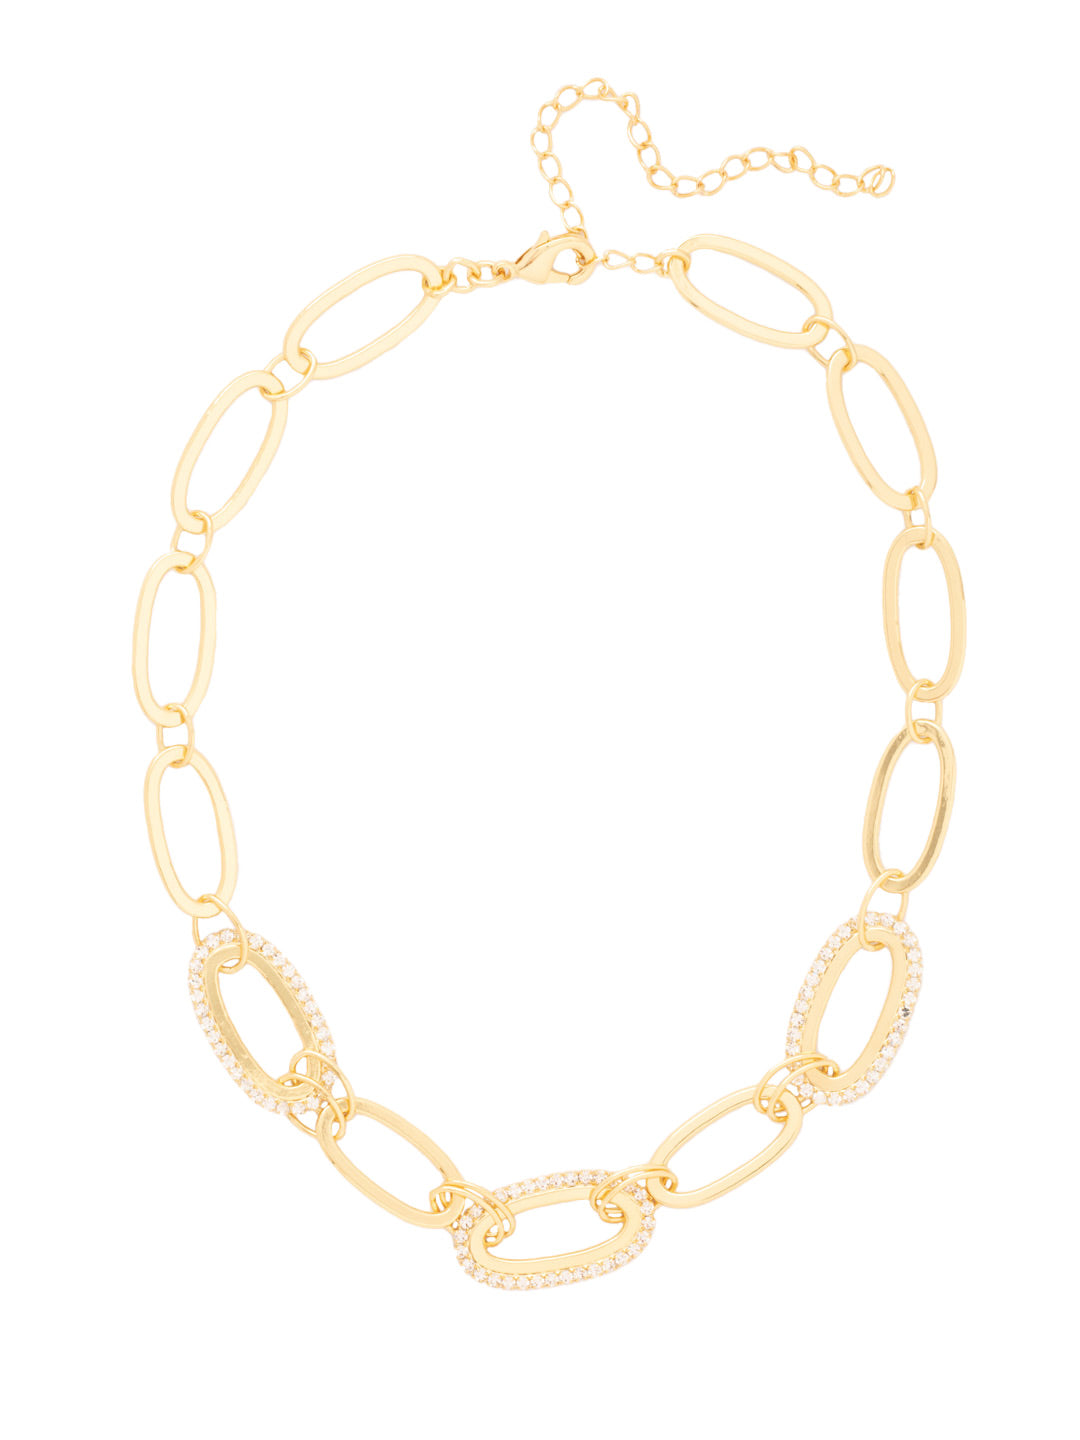 Tori Tennis Necklace - NFL44BGCRY - <p>The Tori Tennis Necklace features alternating rhinestone and metal chain links on an adjustable chain secured with a lobster claw clasp. From Sorrelli's Crystal collection in our Bright Gold-tone finish.</p>